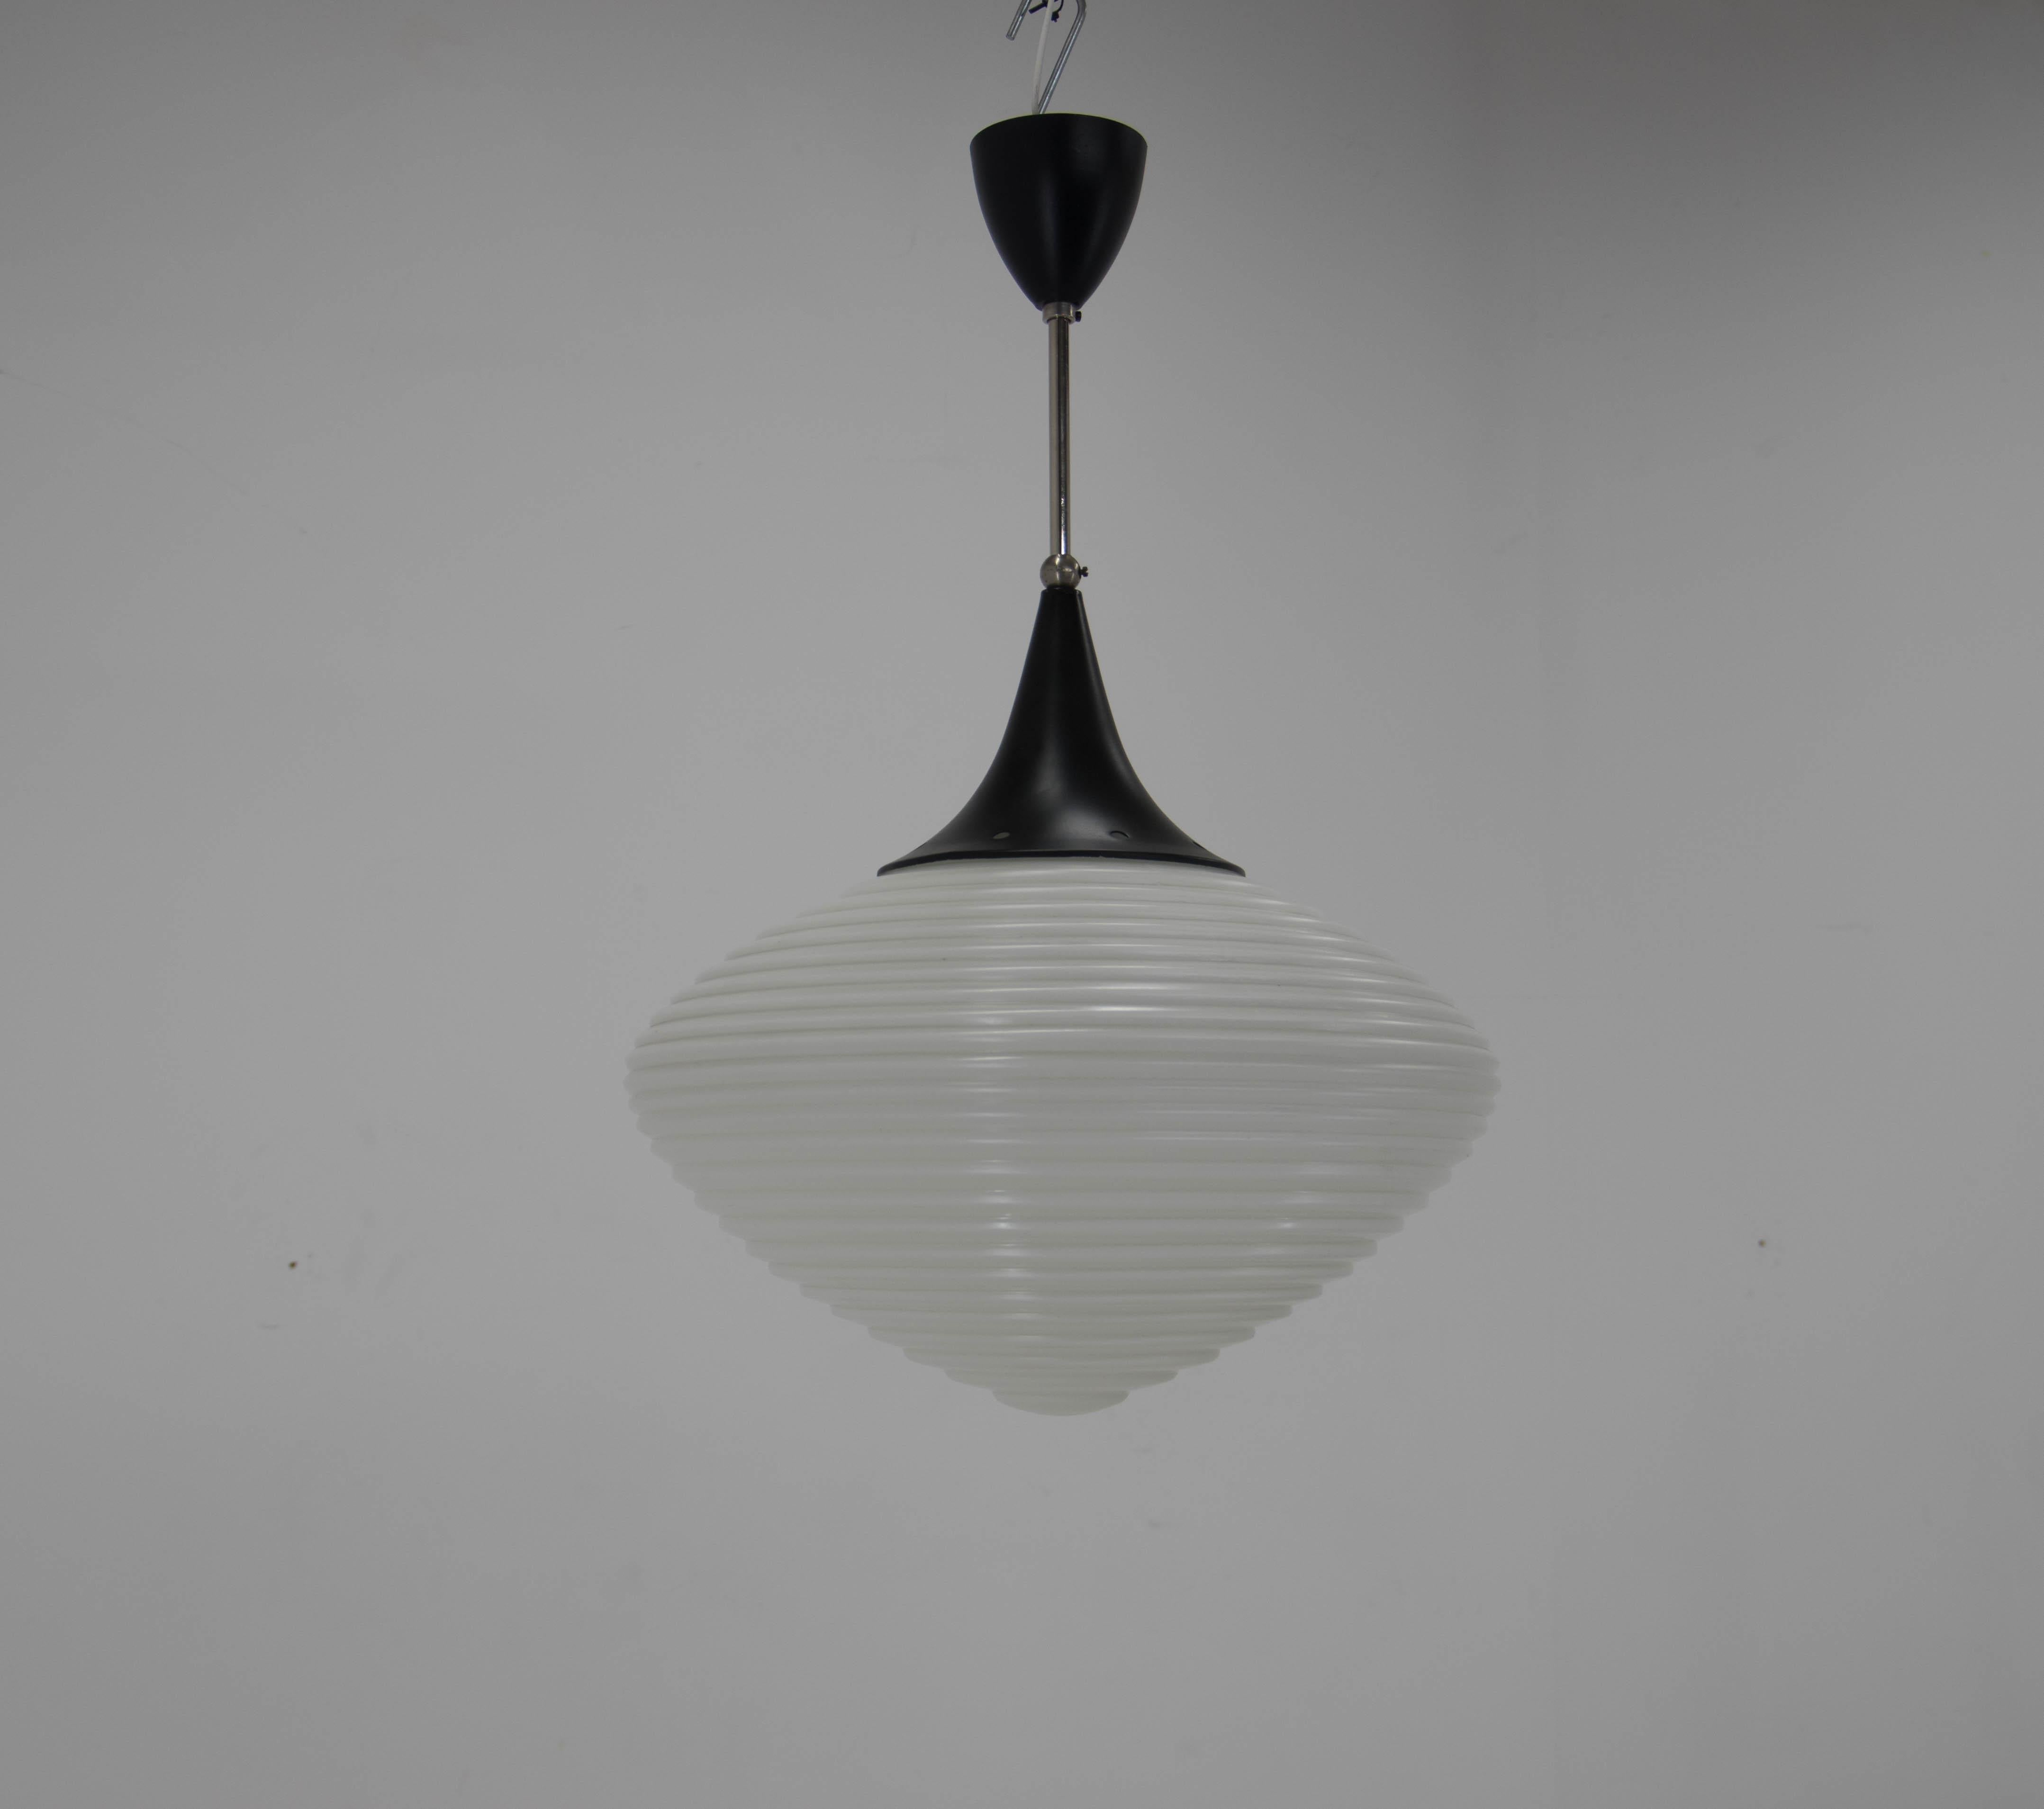 Mid-century design pendant with glass shade. Made in Czechoslovakia by Kamenicky Senov
Very good original condition
1X100W, E25-E27 bulb
Rewired: US wiring compatible.